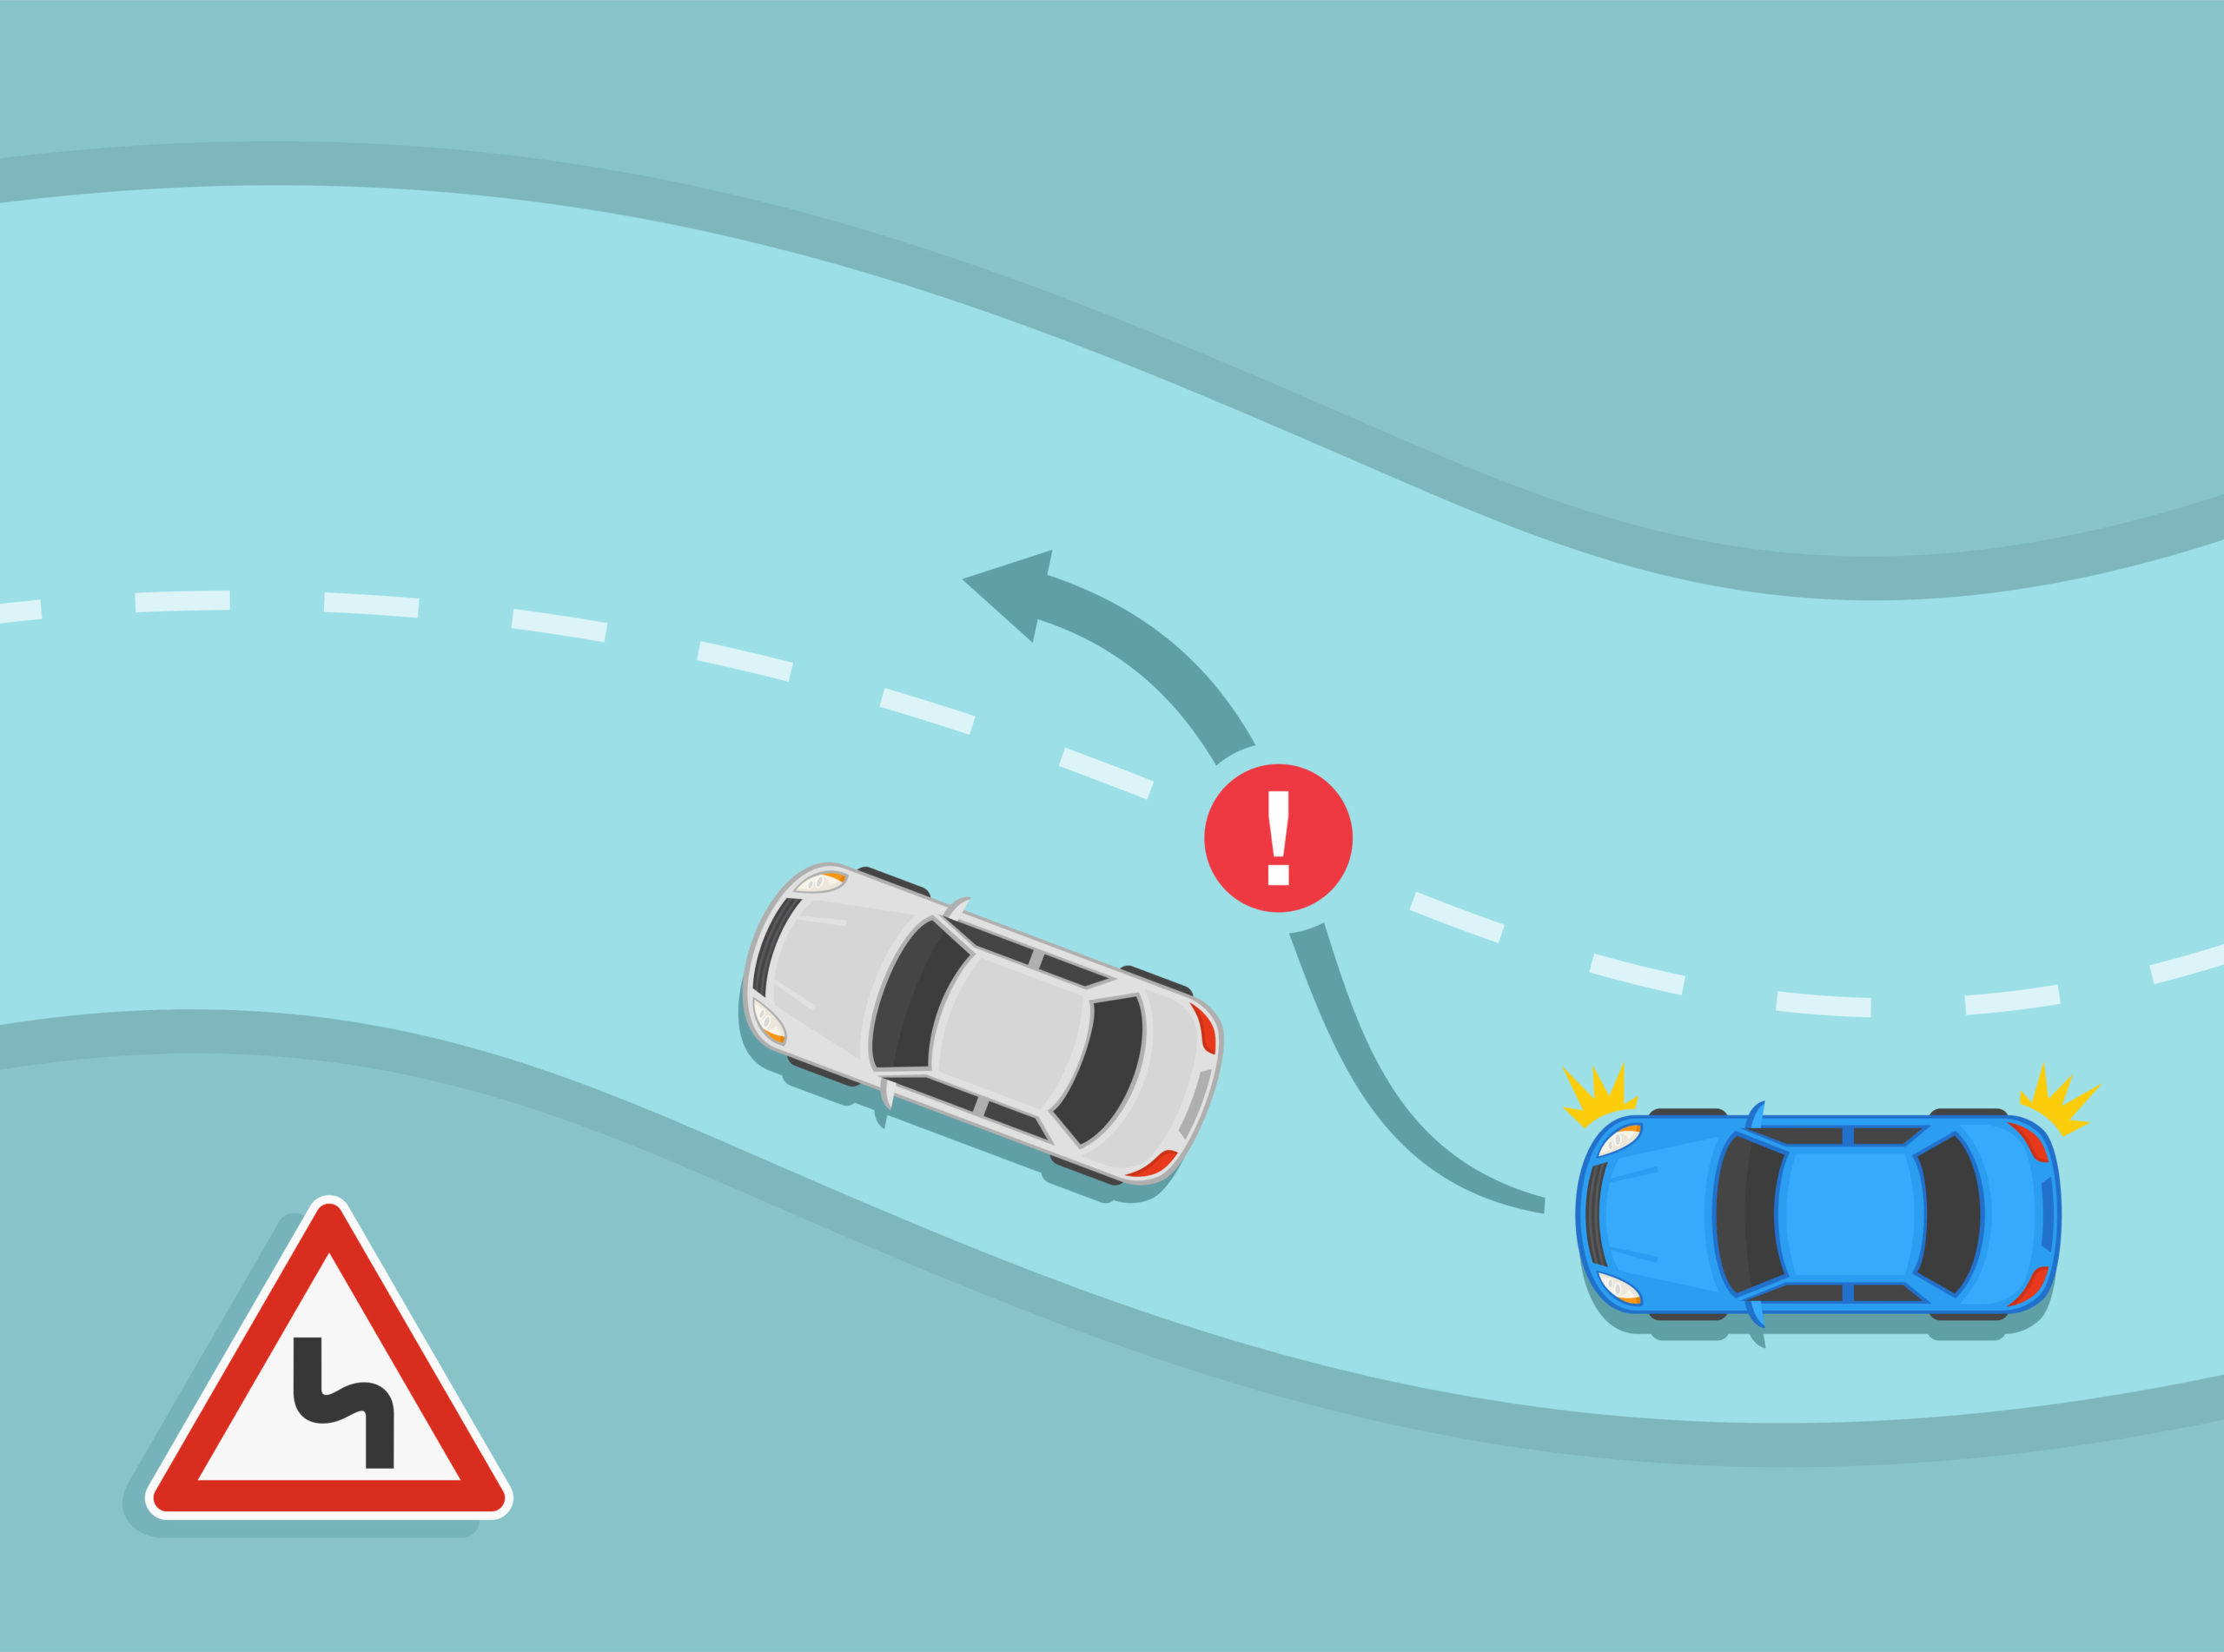 Where Should You Avoid Overtaking?